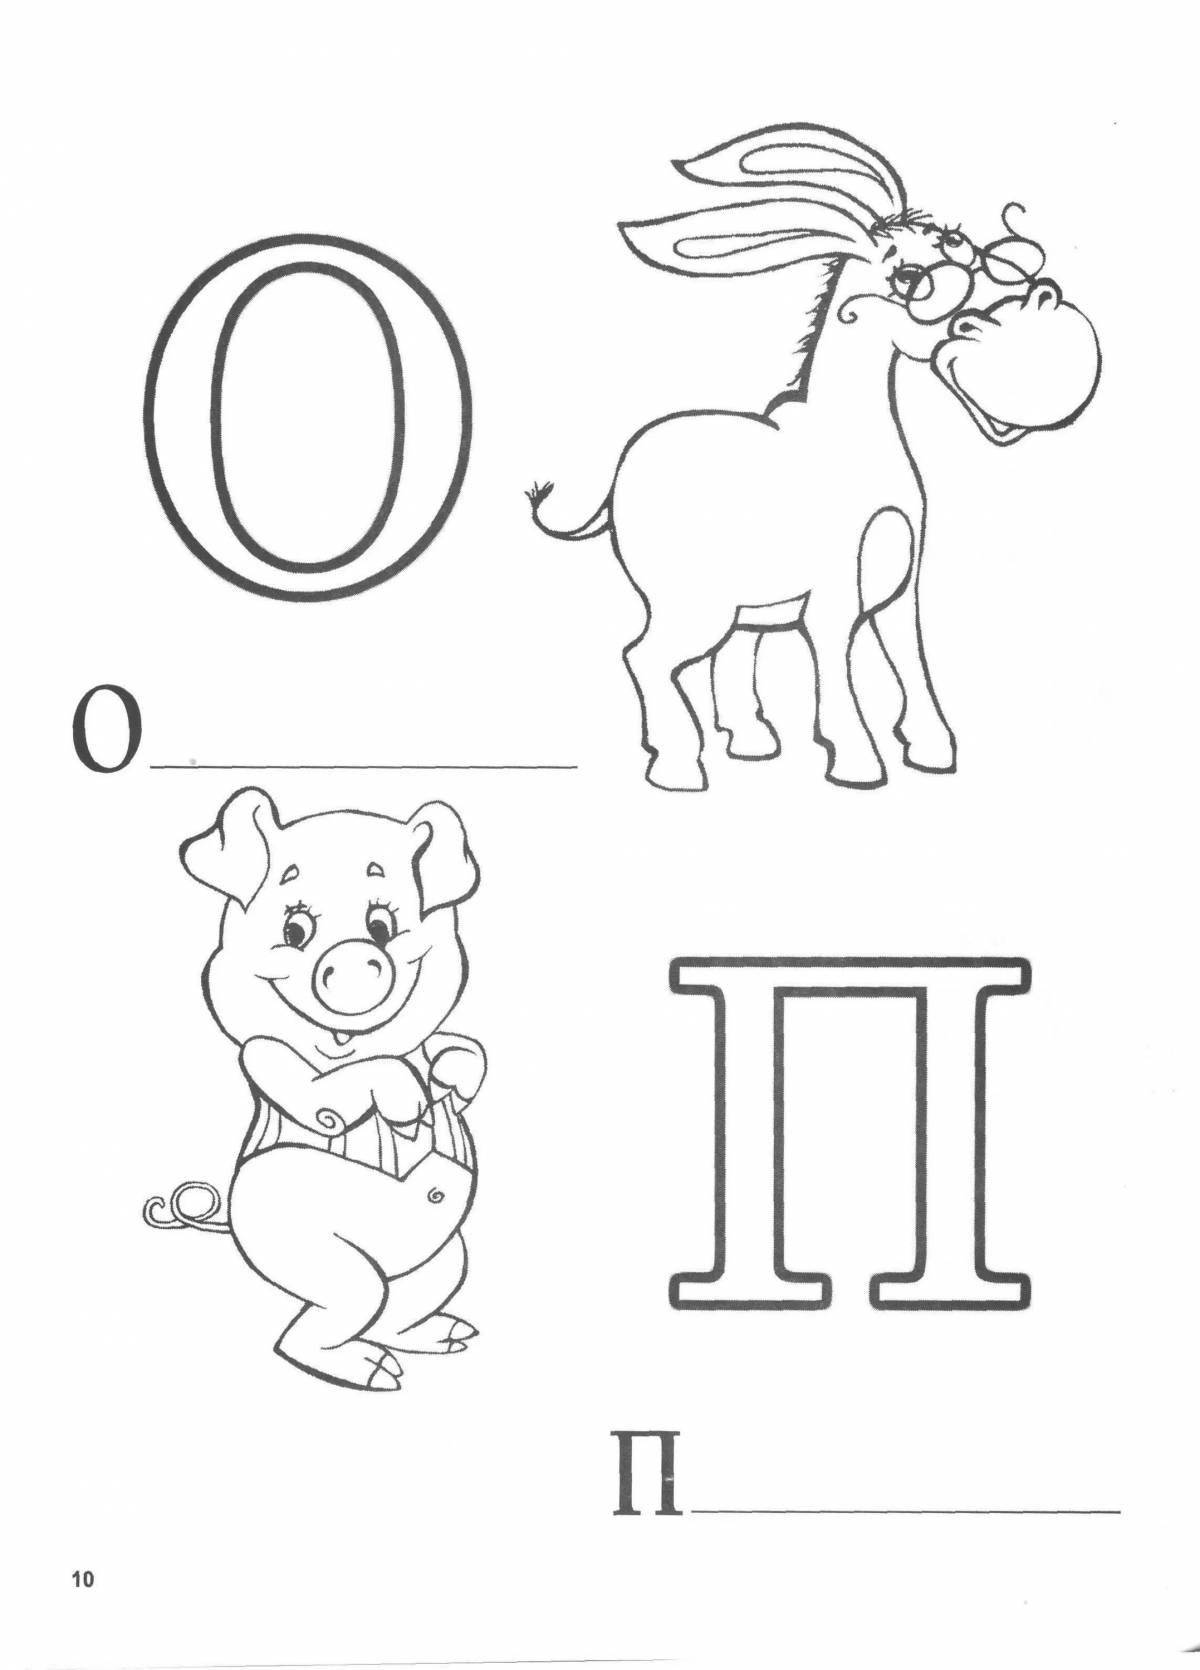 Coloring letters for kids 5 years old